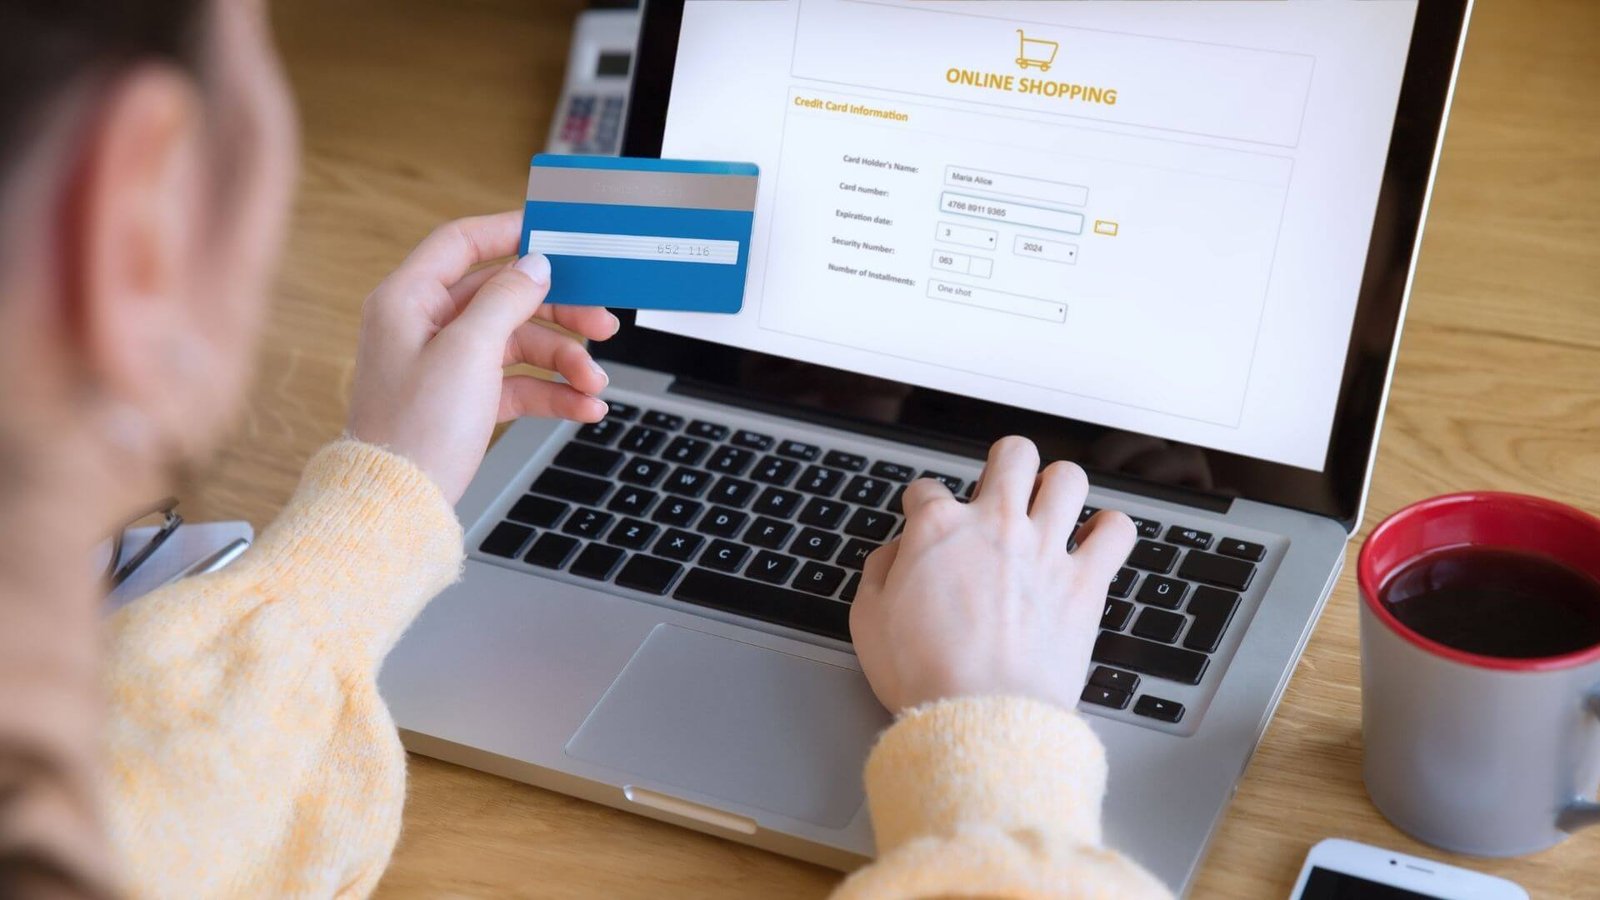 5 things you need to be aware of before entering credit card details at an online store banner delivered korea